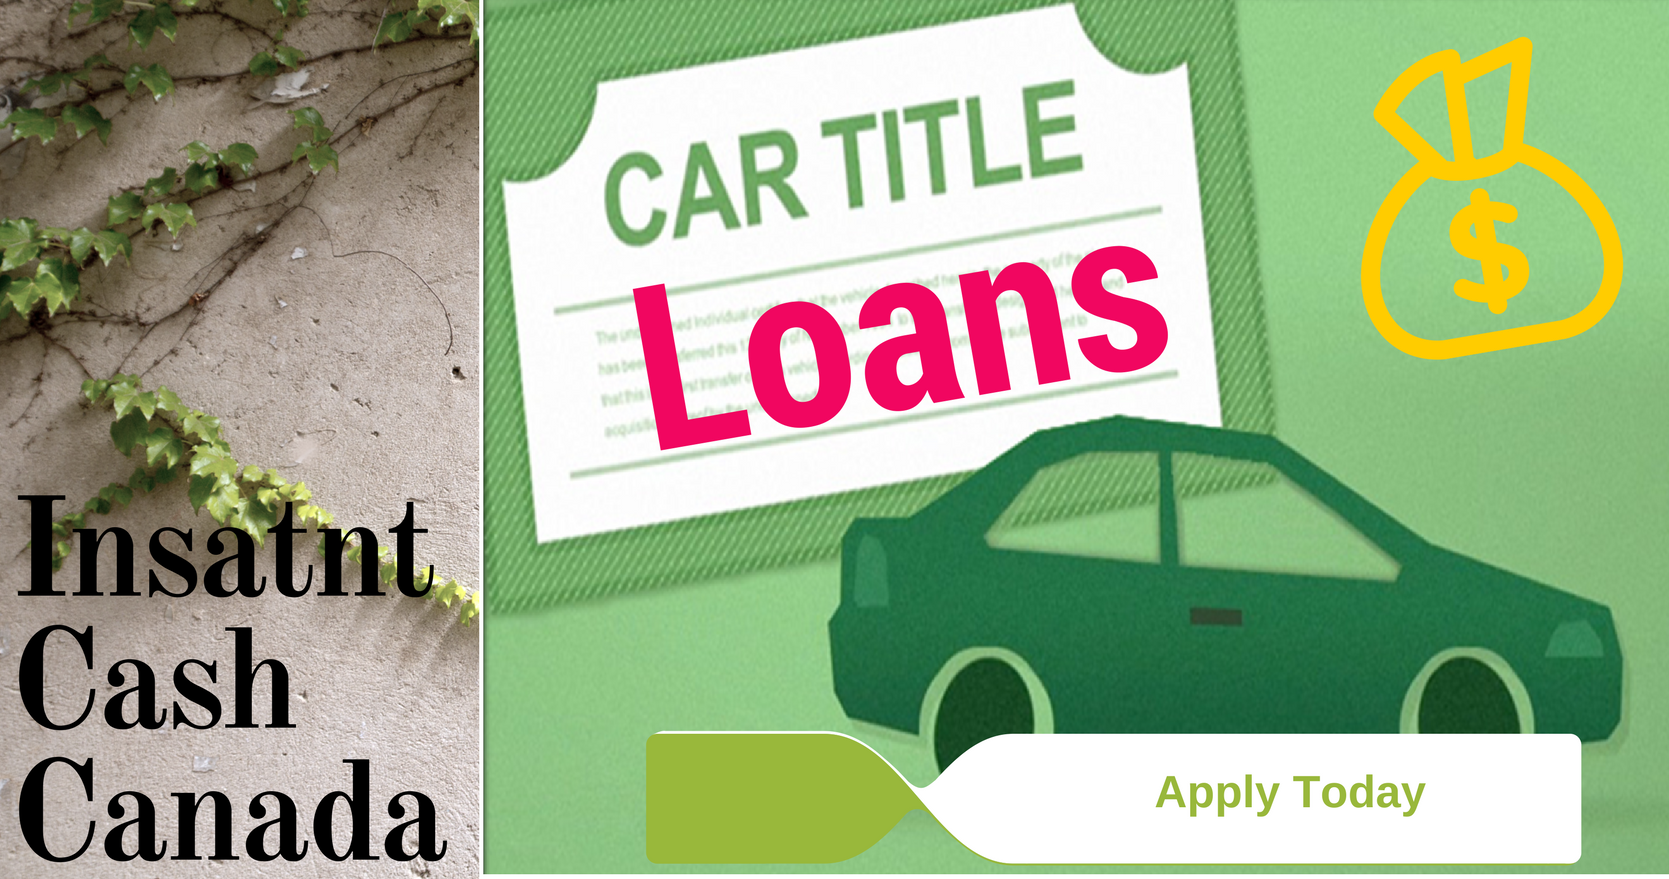 Secure Car Title Loans From Instant Cash Canada!